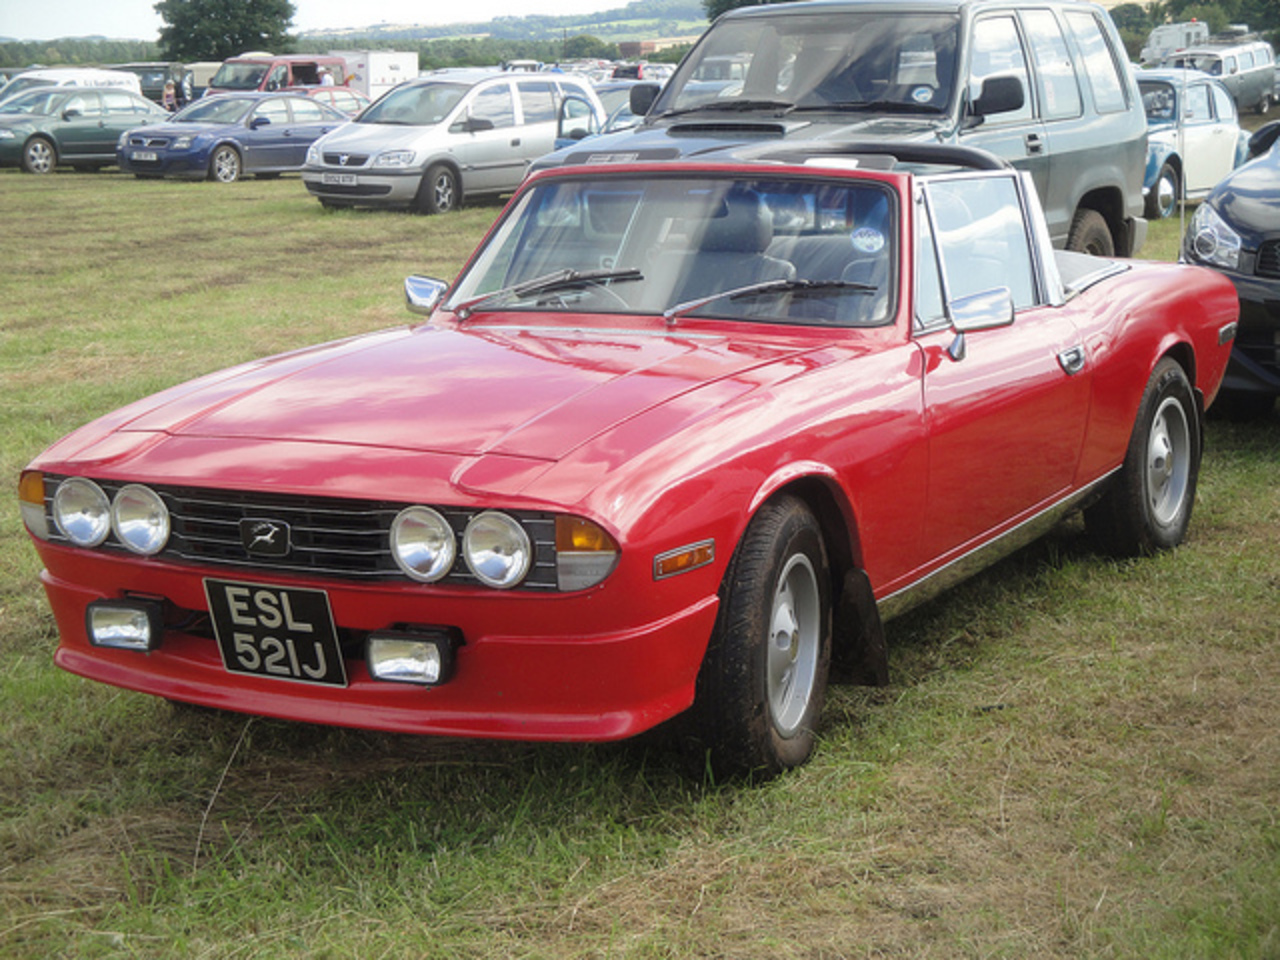 1970 Triumph Stag | Flickr - Photo Sharing!